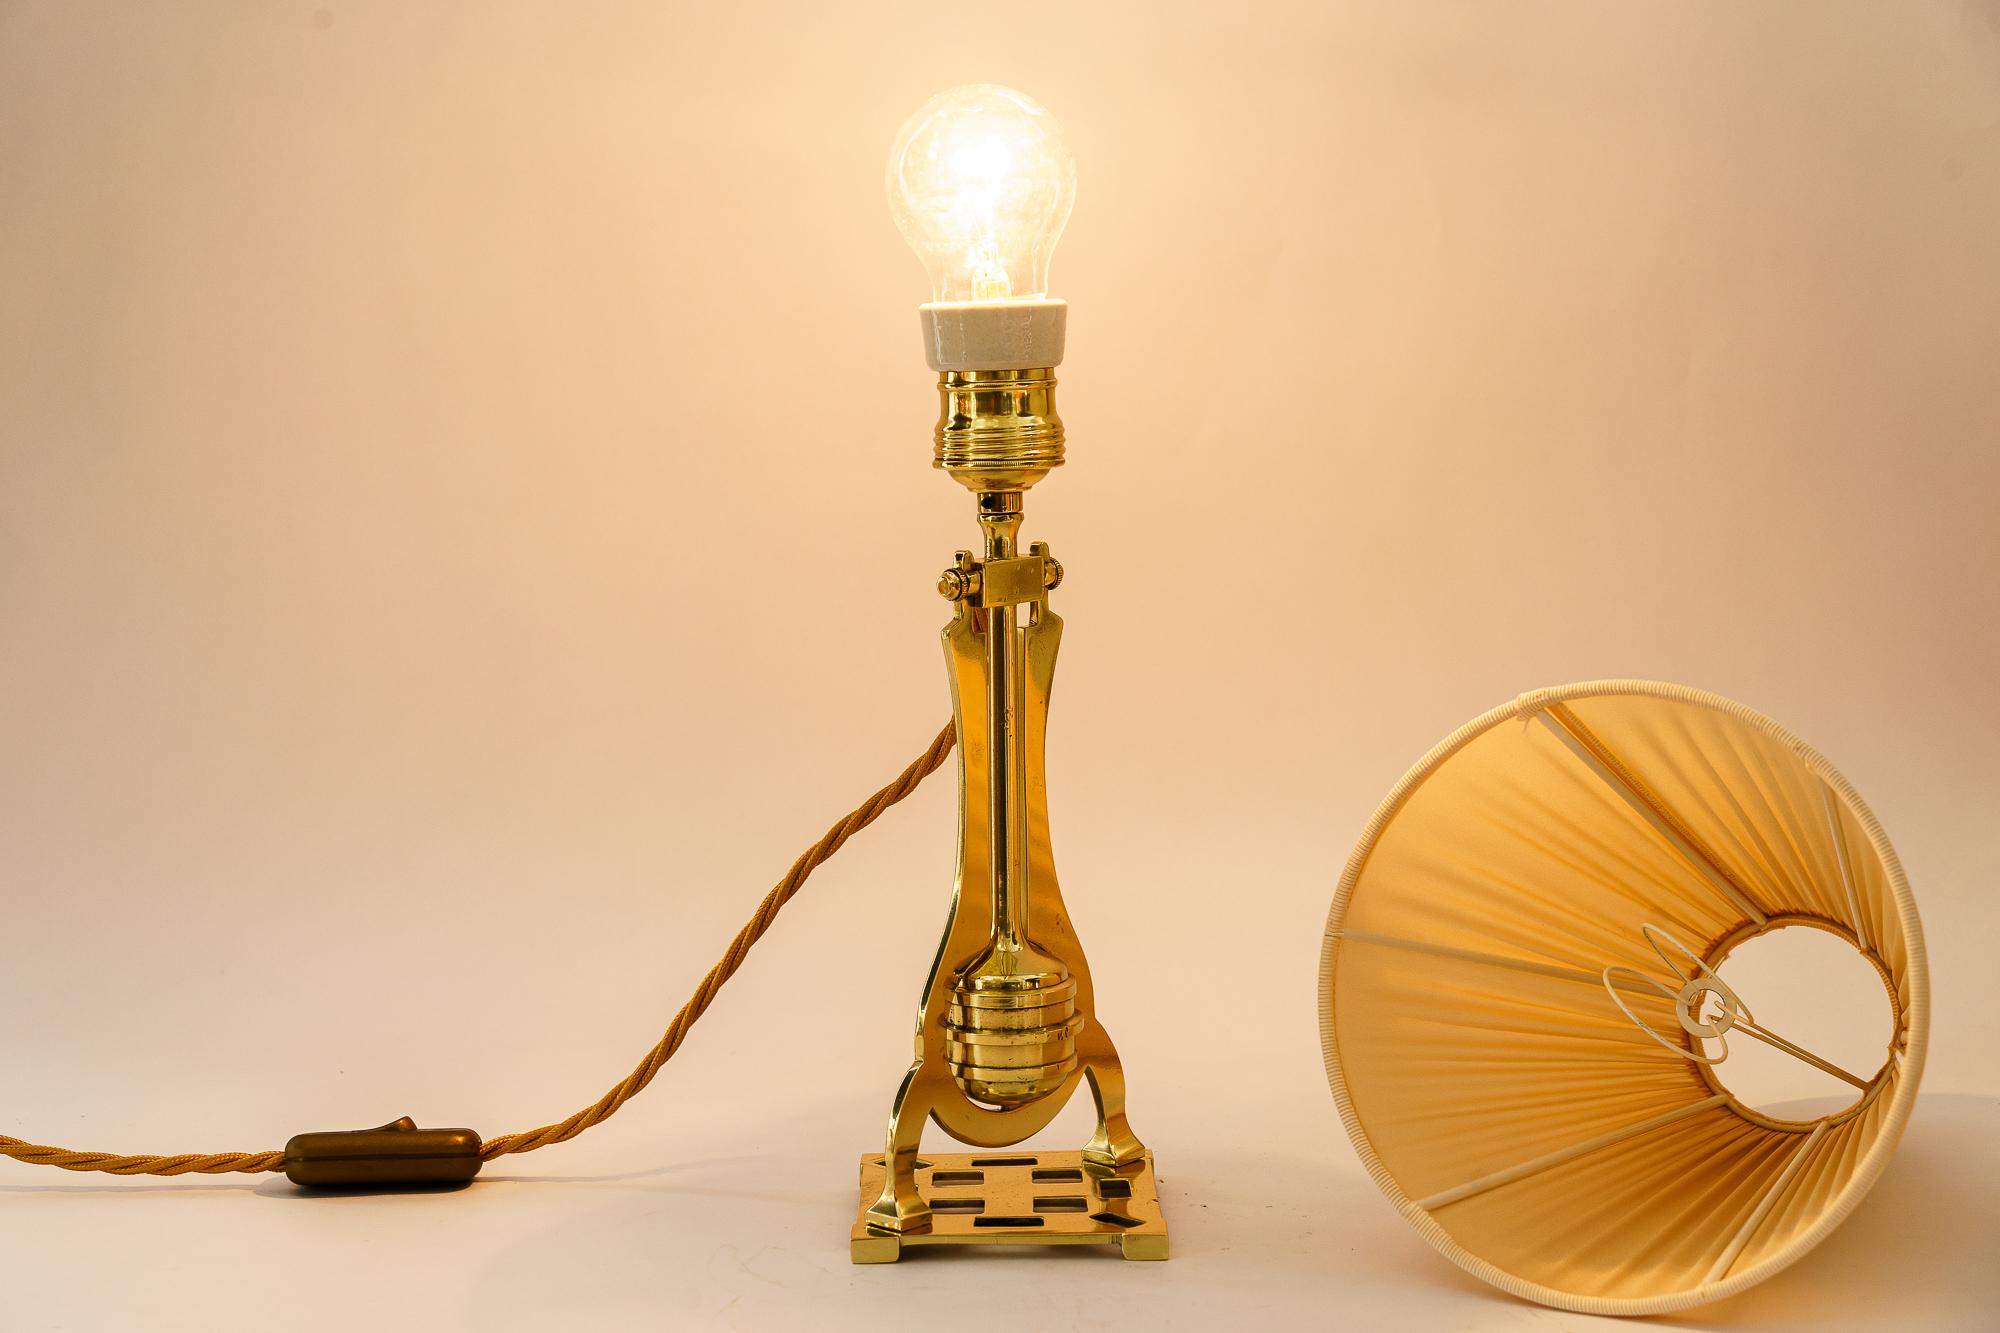 Art Deco table lamp vienna around 1920s For Sale 4